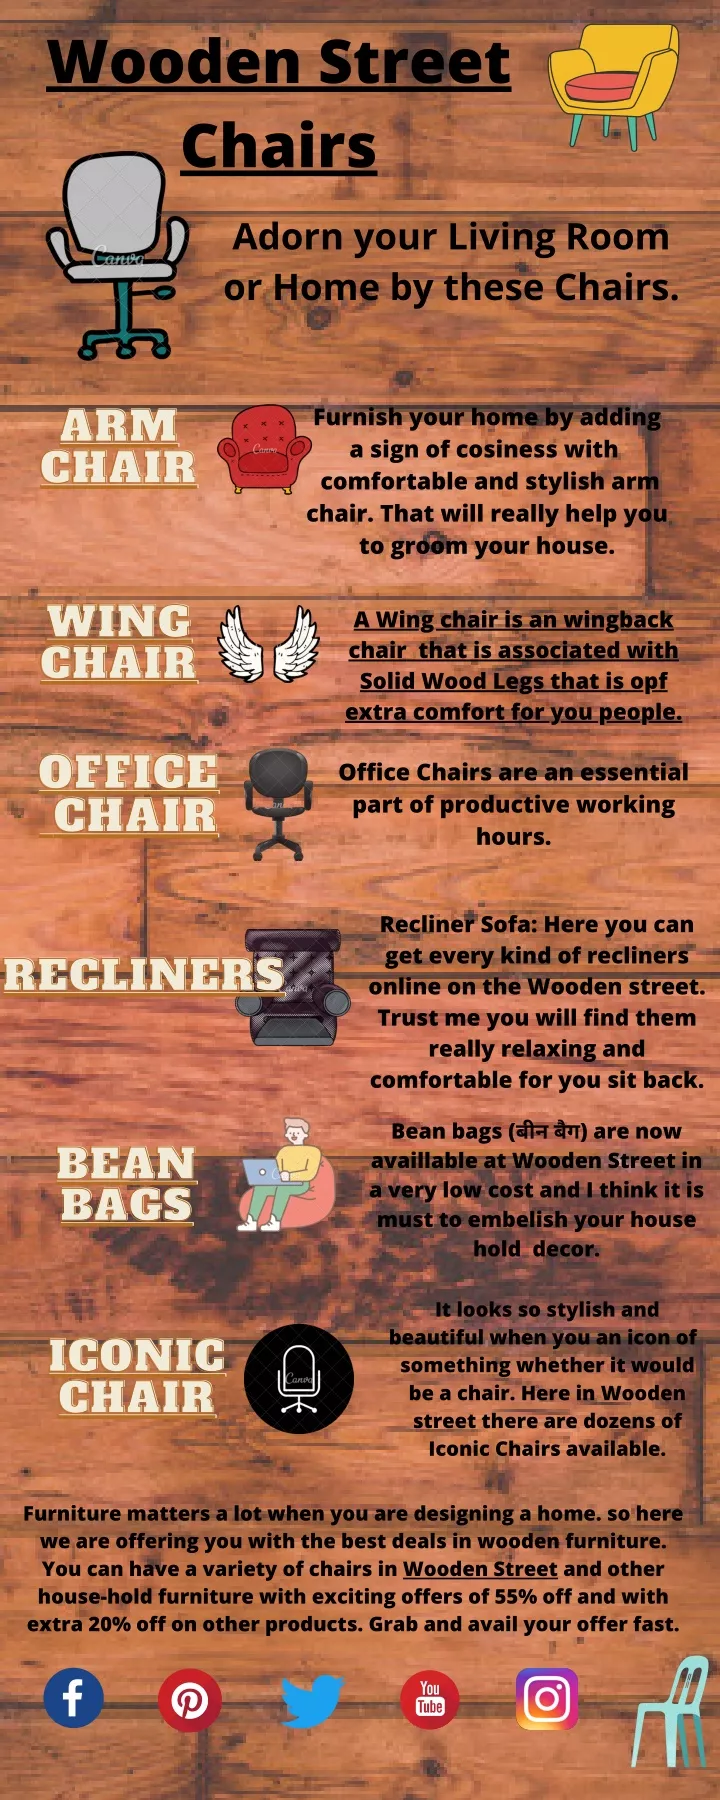 wooden street chairs